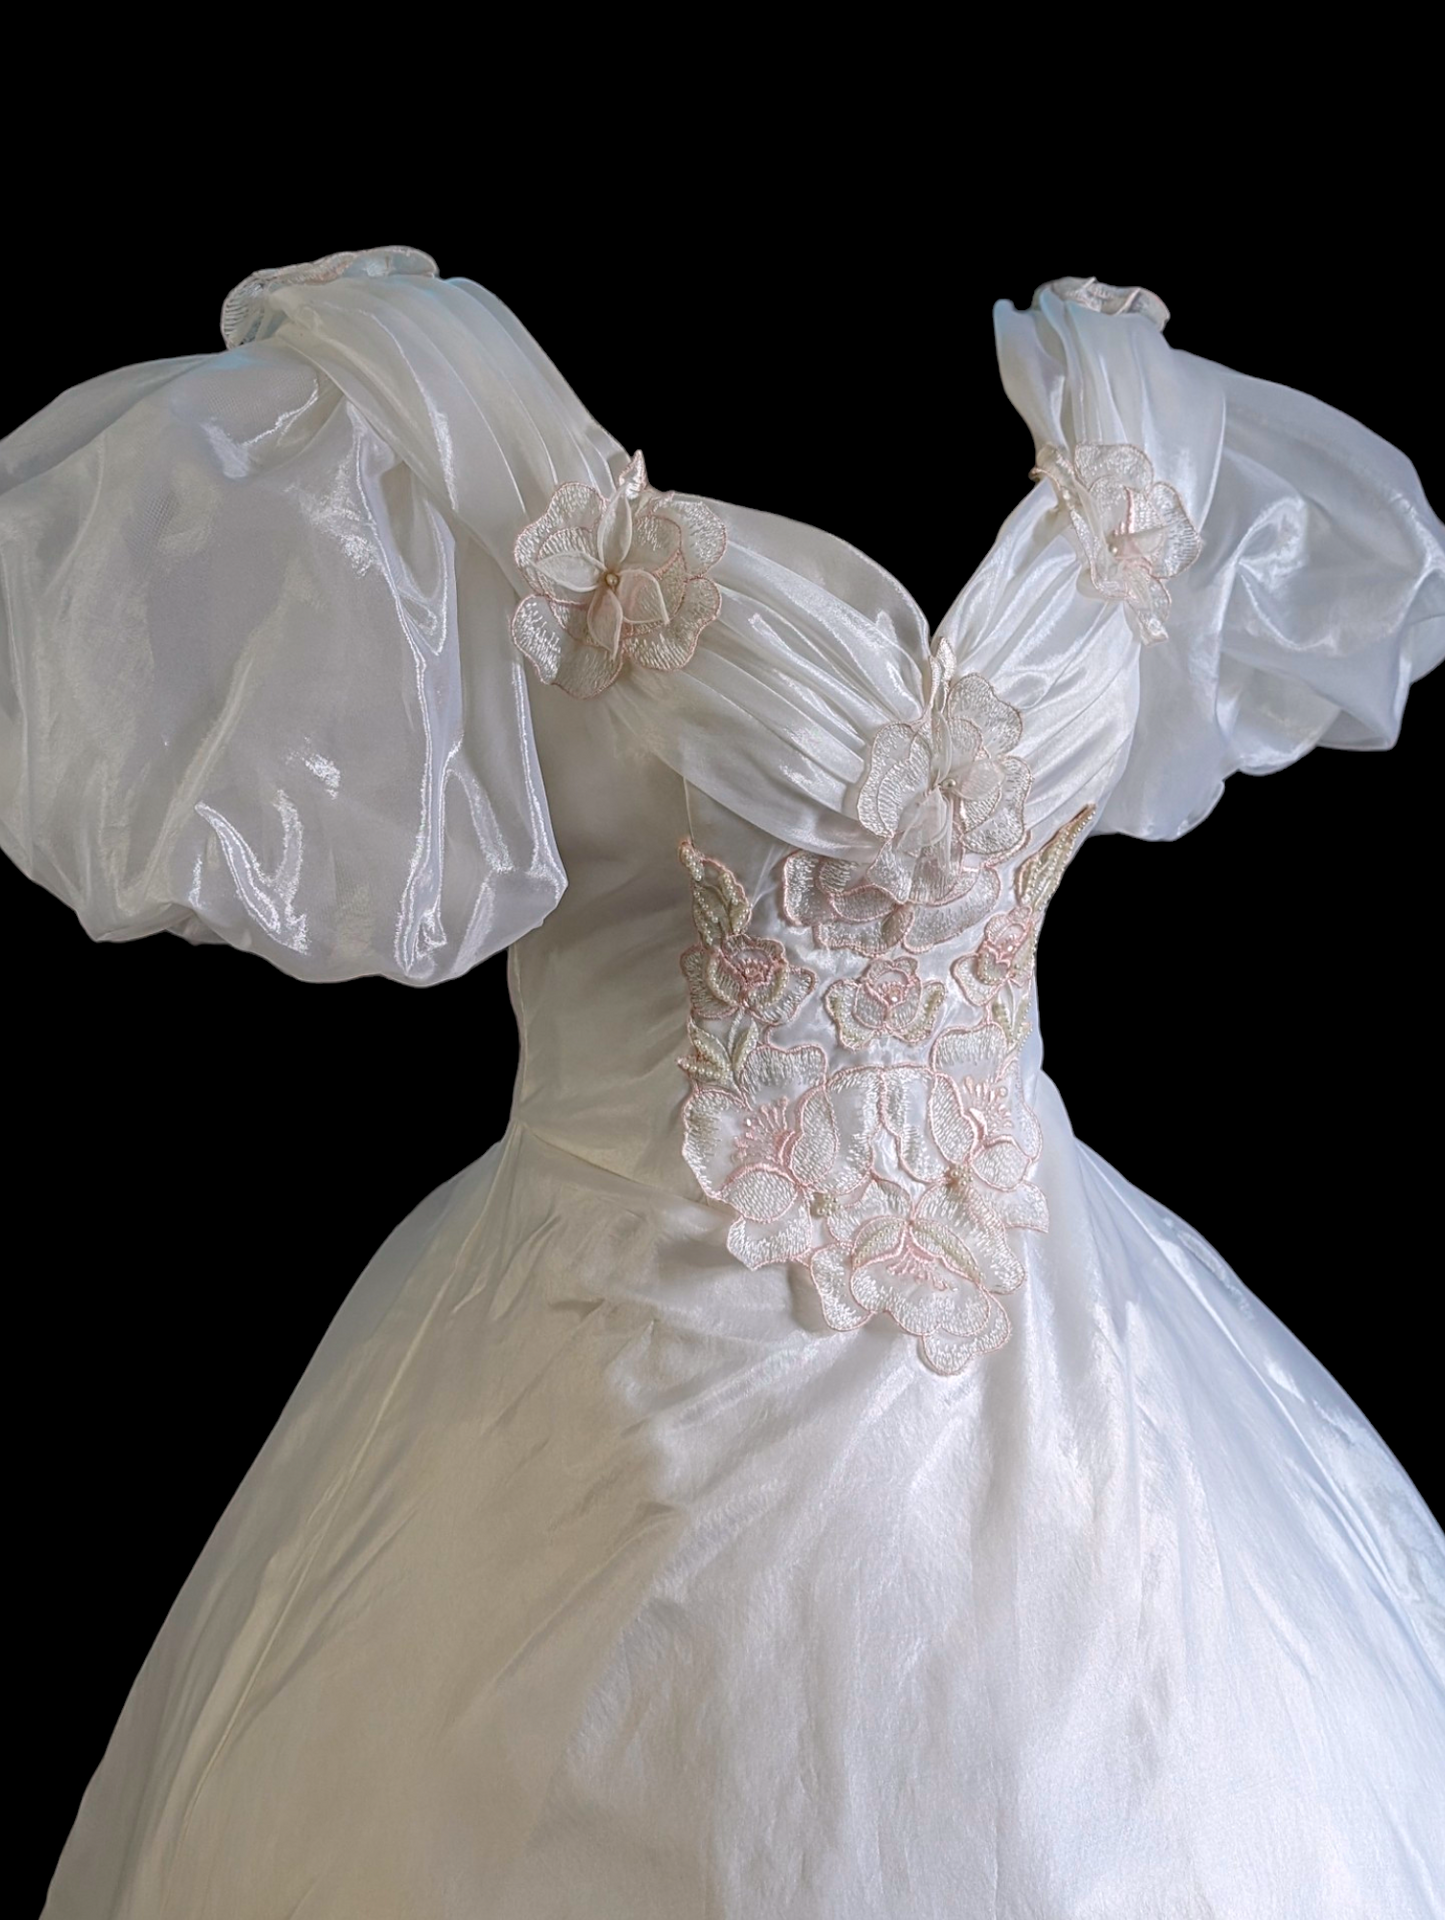 1980s Labyrinth Style Wedding Dress with Puff Sleeves, Open Back and Long Train